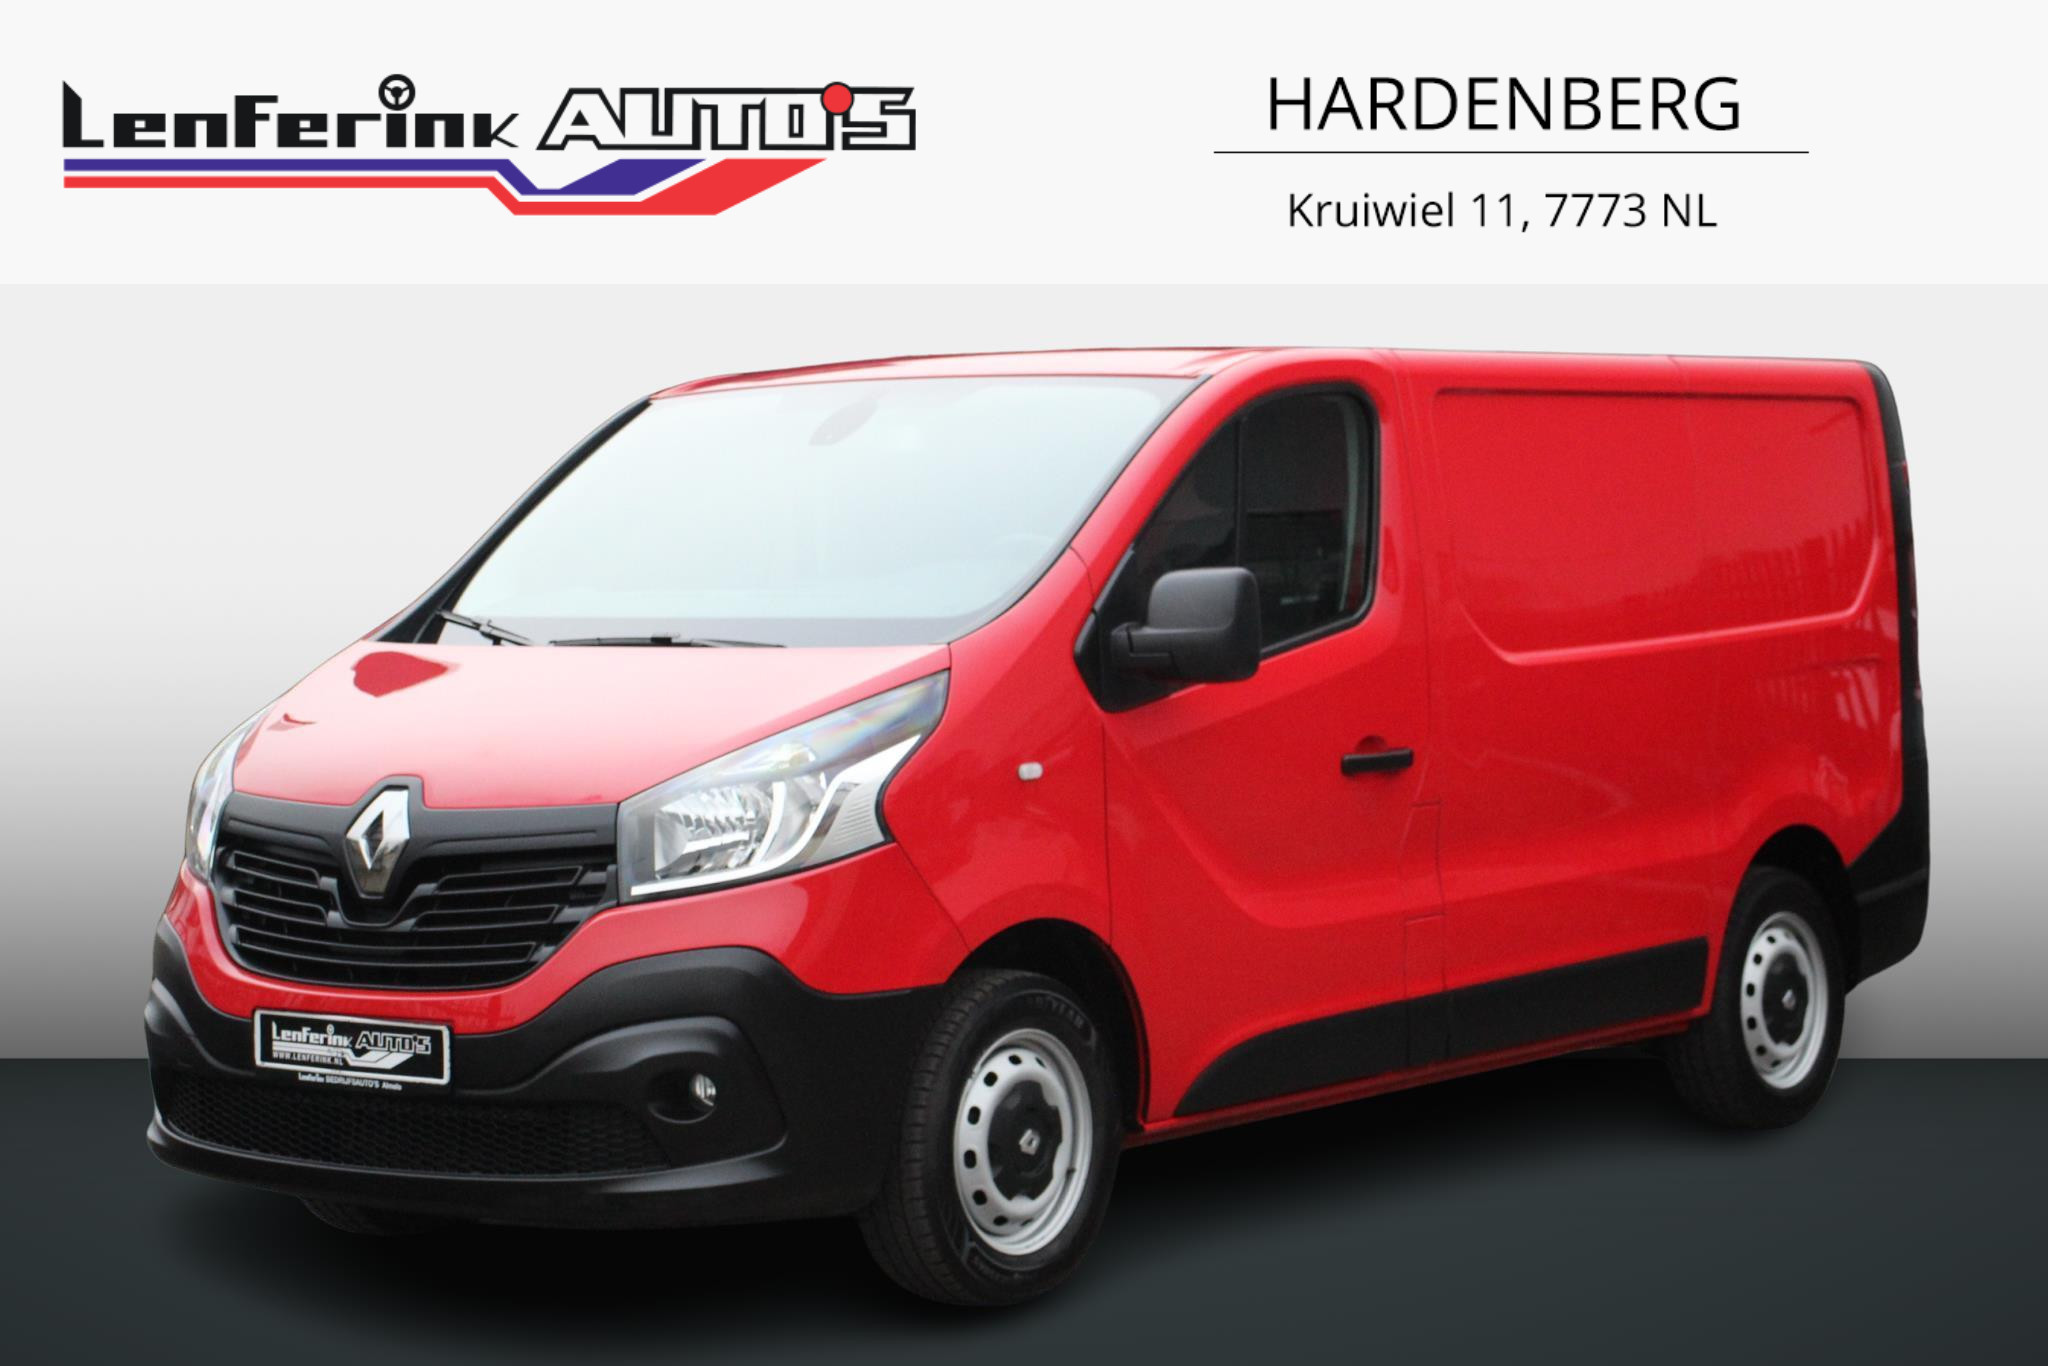 Renault Trafic 1.6DCI 95pk L1H1 AIRO CAMERA PDC achter